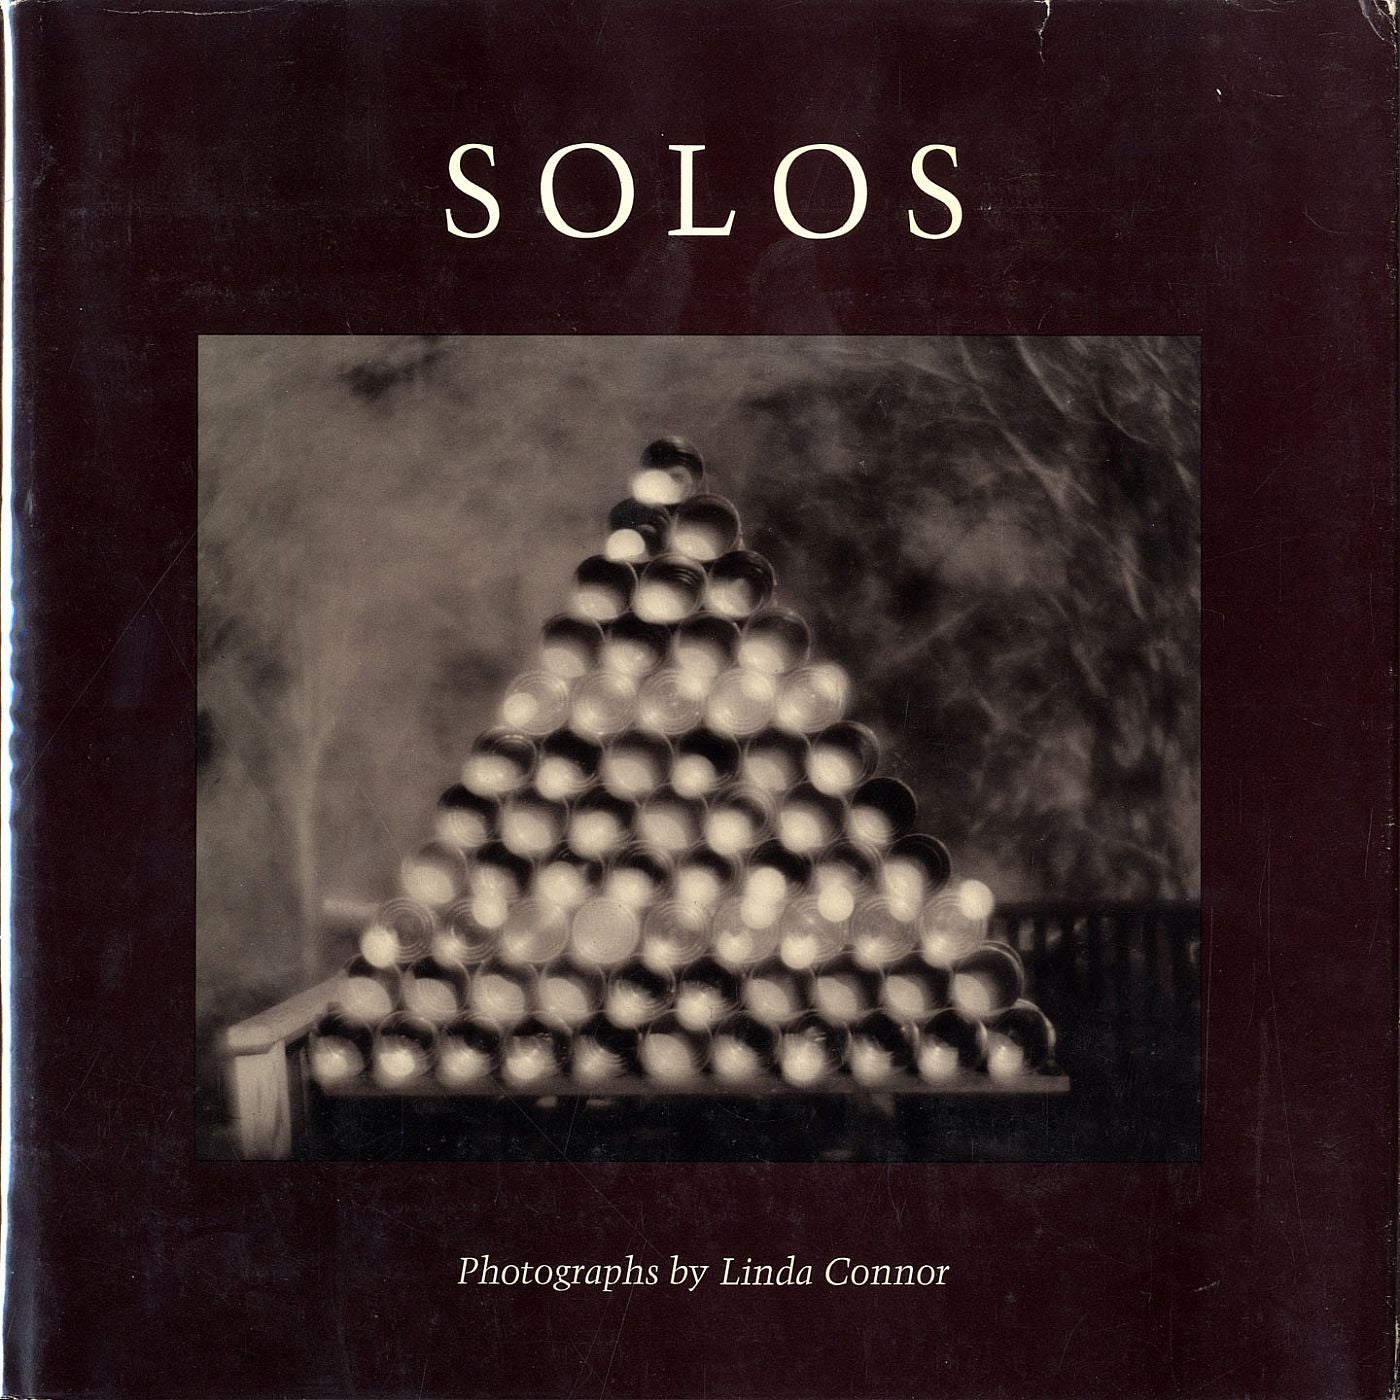 Solos: Photographs by Linda Connor [SIGNED & INSCRIBED]